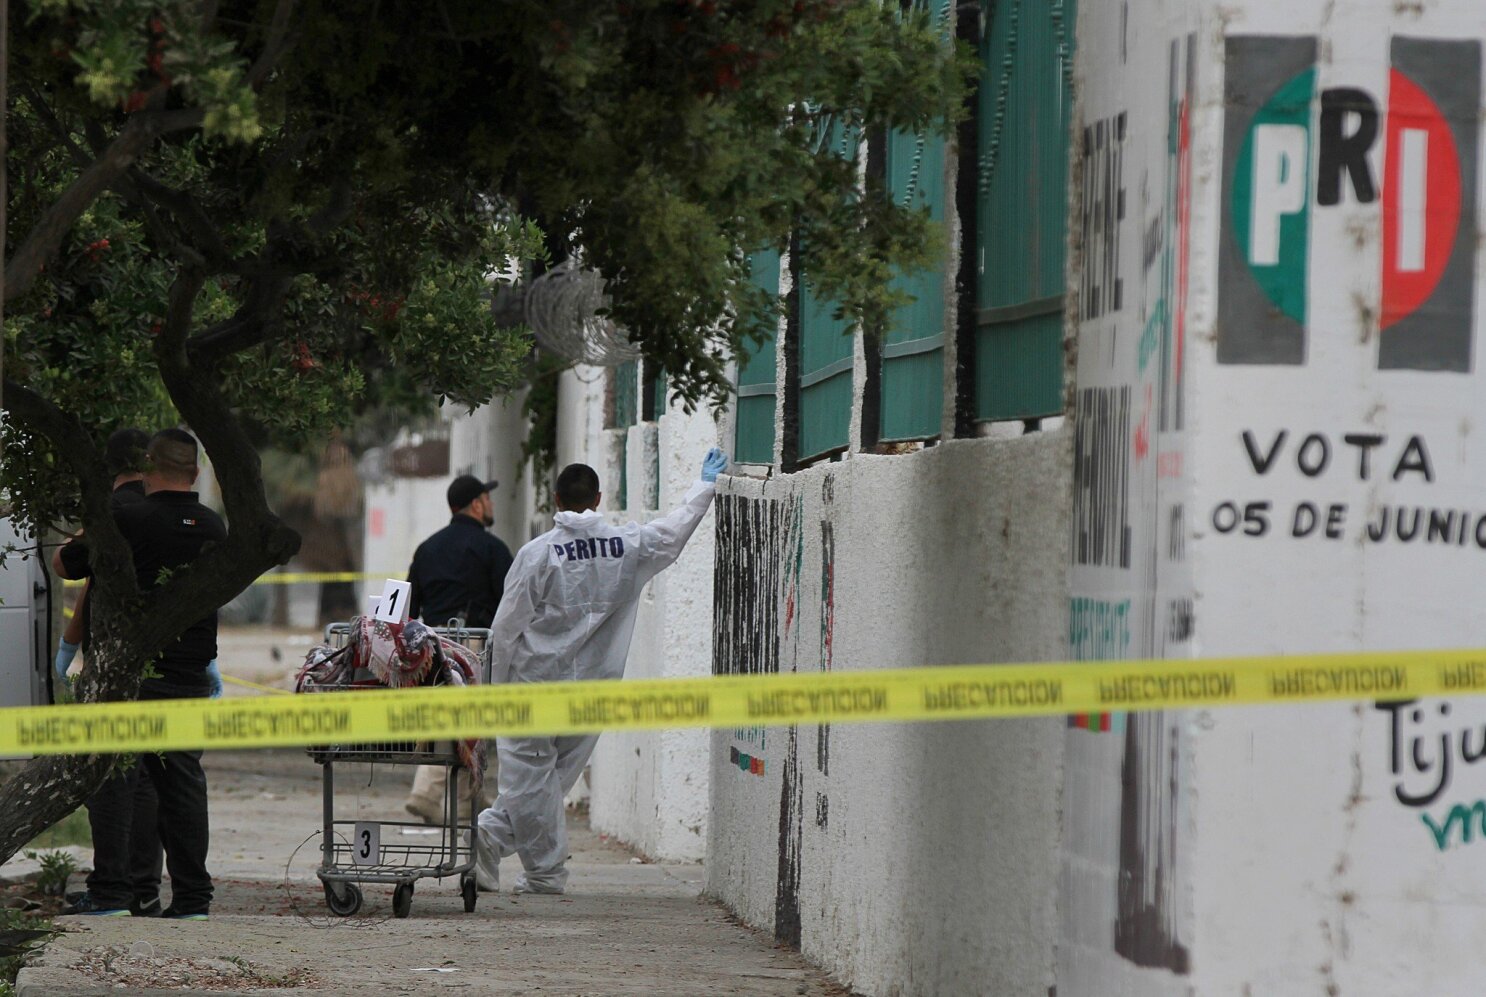 Drug Violence Continues To Grip Tijuana With Most Homicides Of Any City In Mexico The San Diego Union Tribune